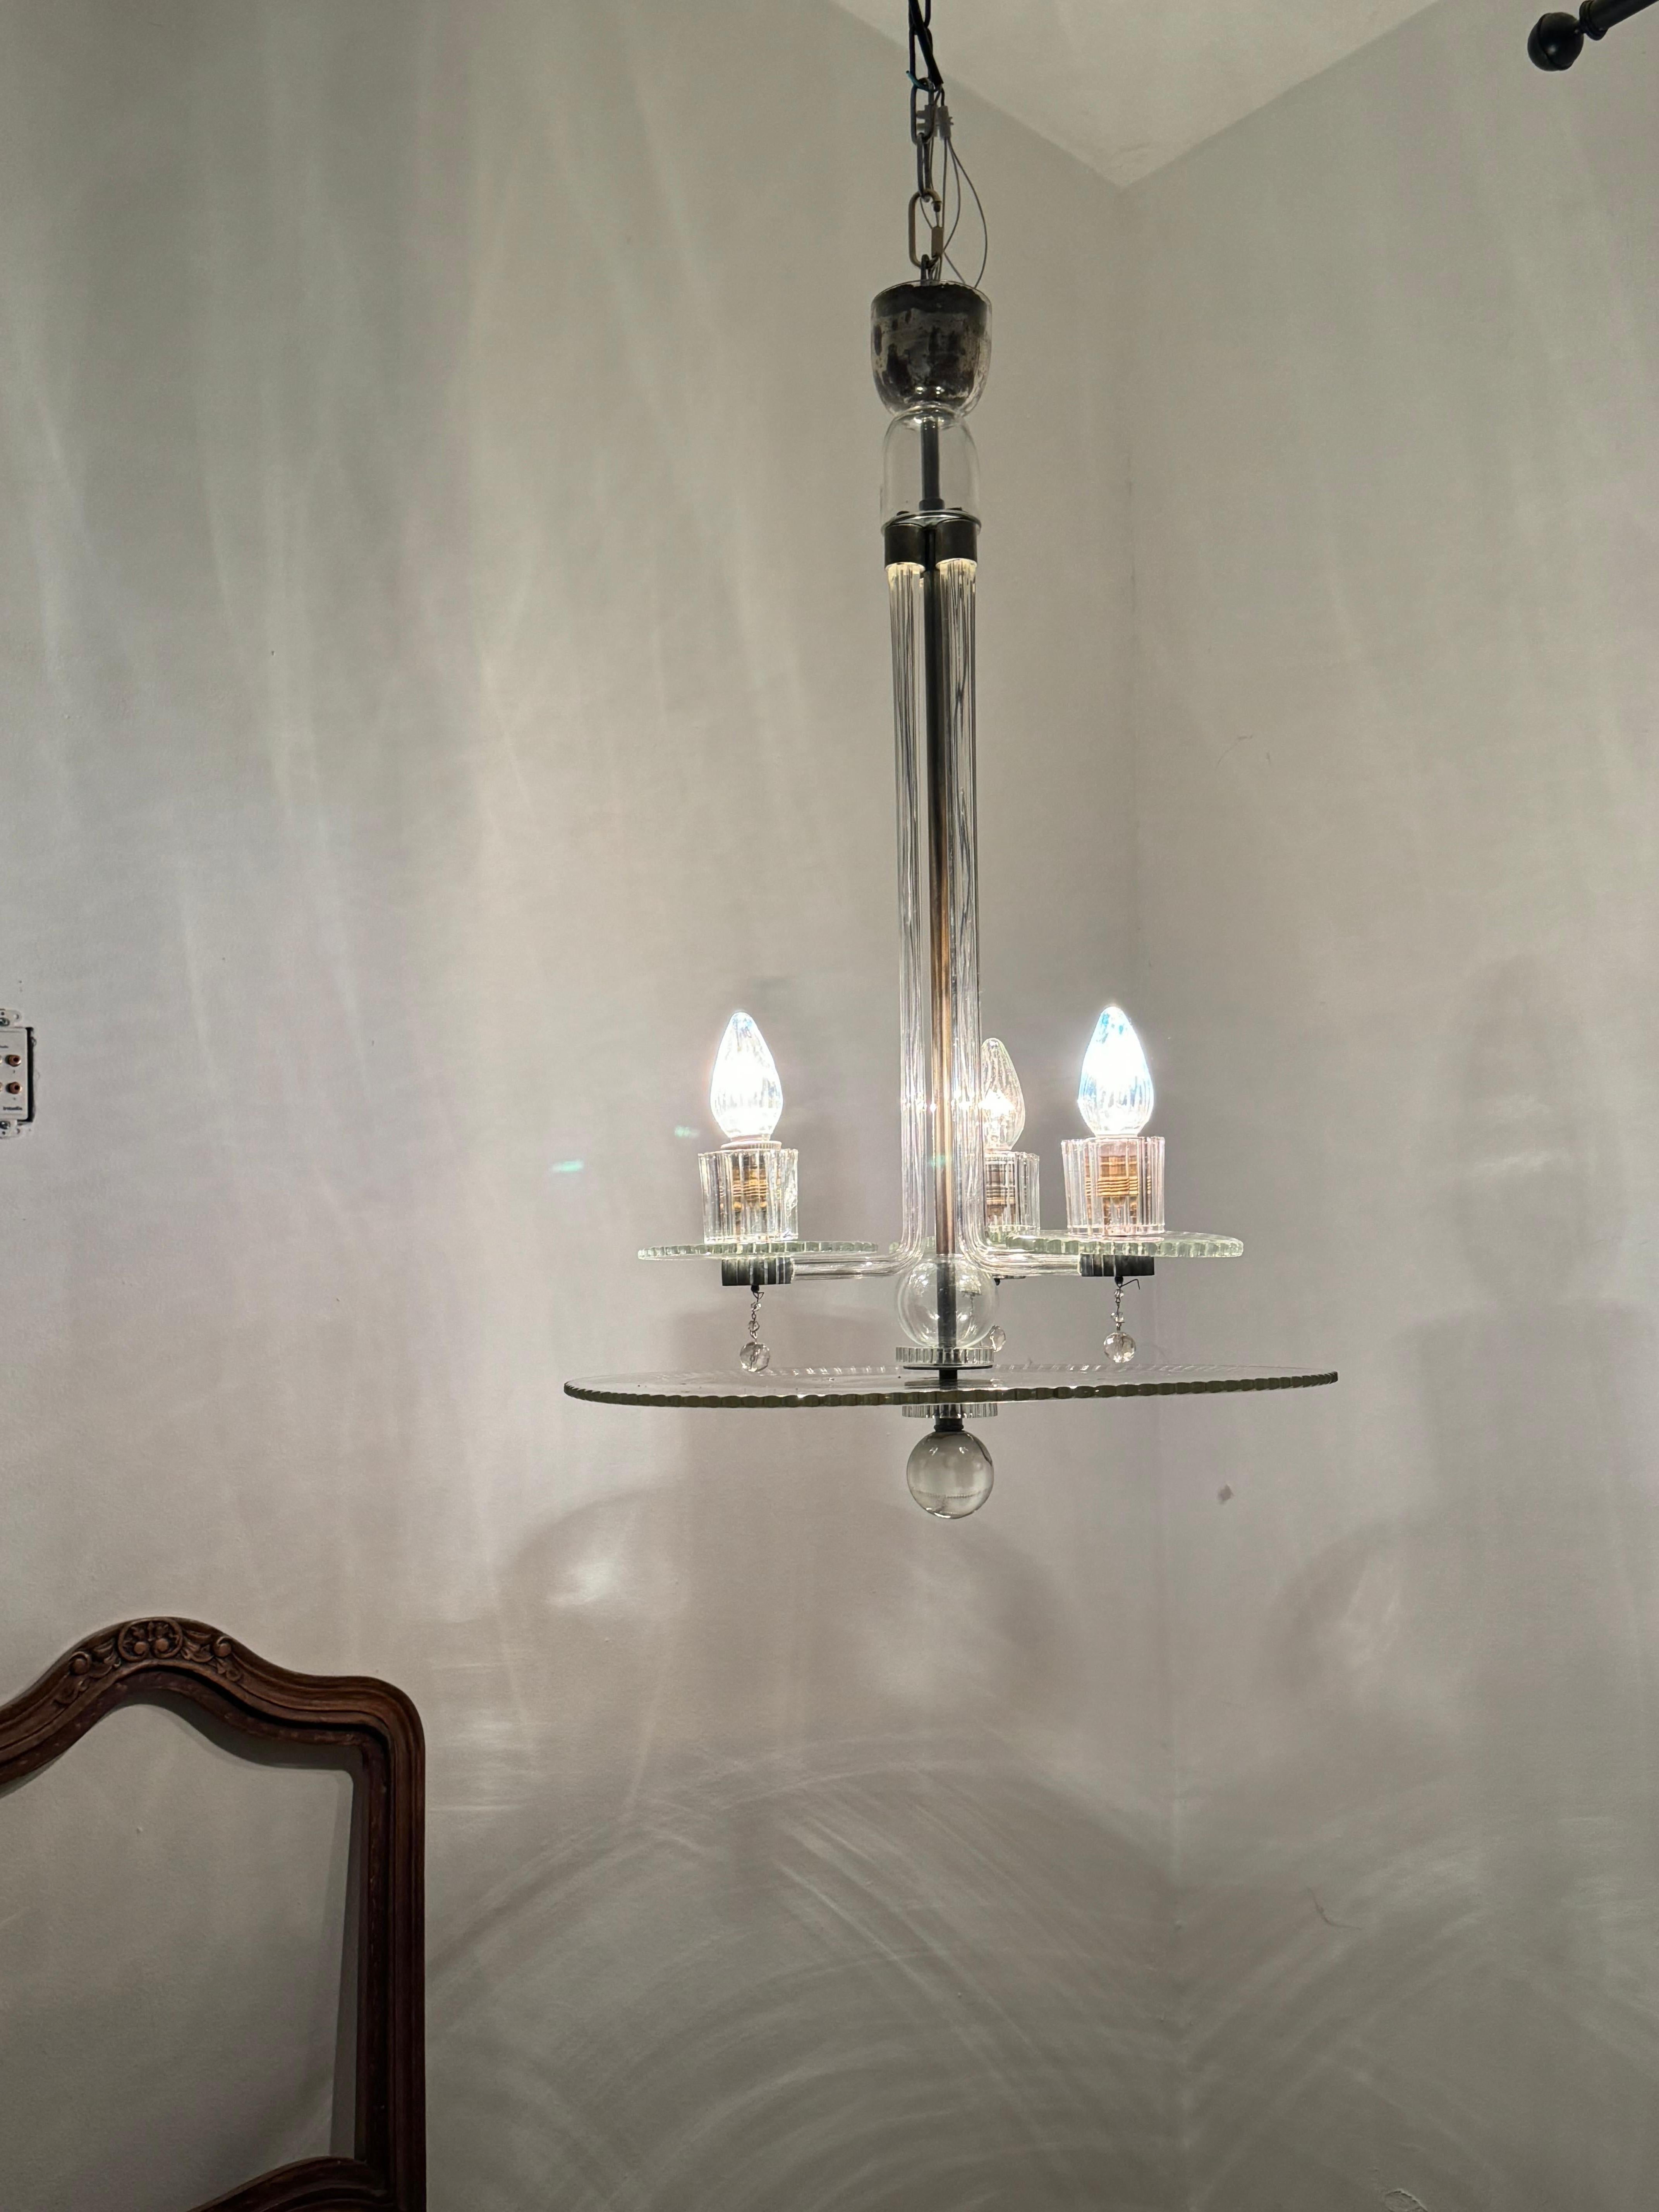 Beautiful  3 light chandelier manufactured in hand carved glass.
This is a very unique chandelier as we have not come accross something similar before.
Measures 85 cm tall and 51 cm wide (disk´s diameter)
The top cup of the chandelier has a mirror